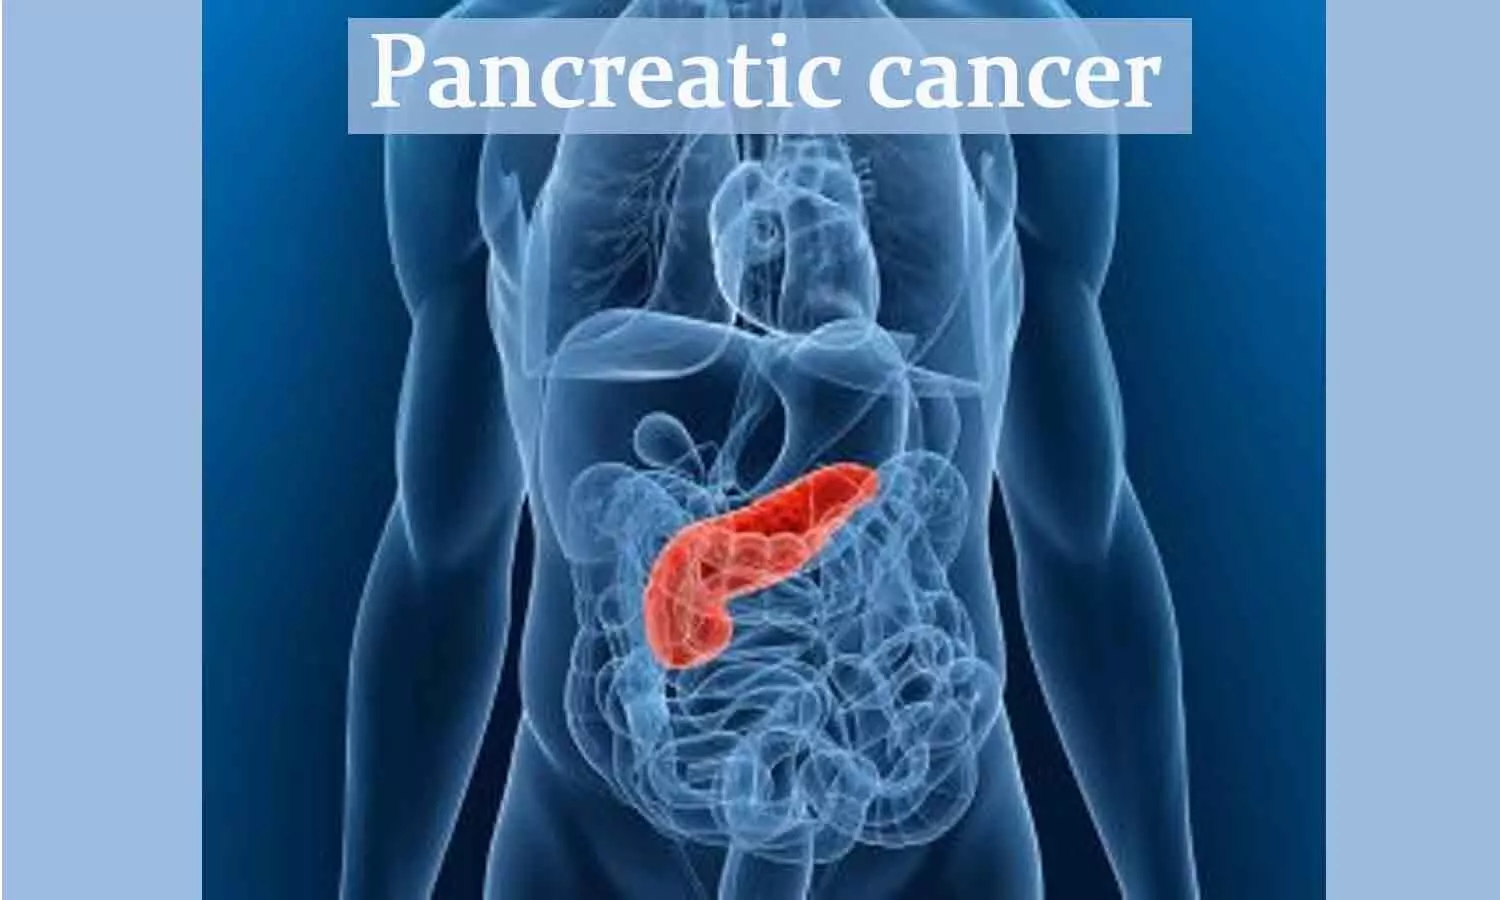 High fasting blood sugar tied to development of pancreatic cancer: Study